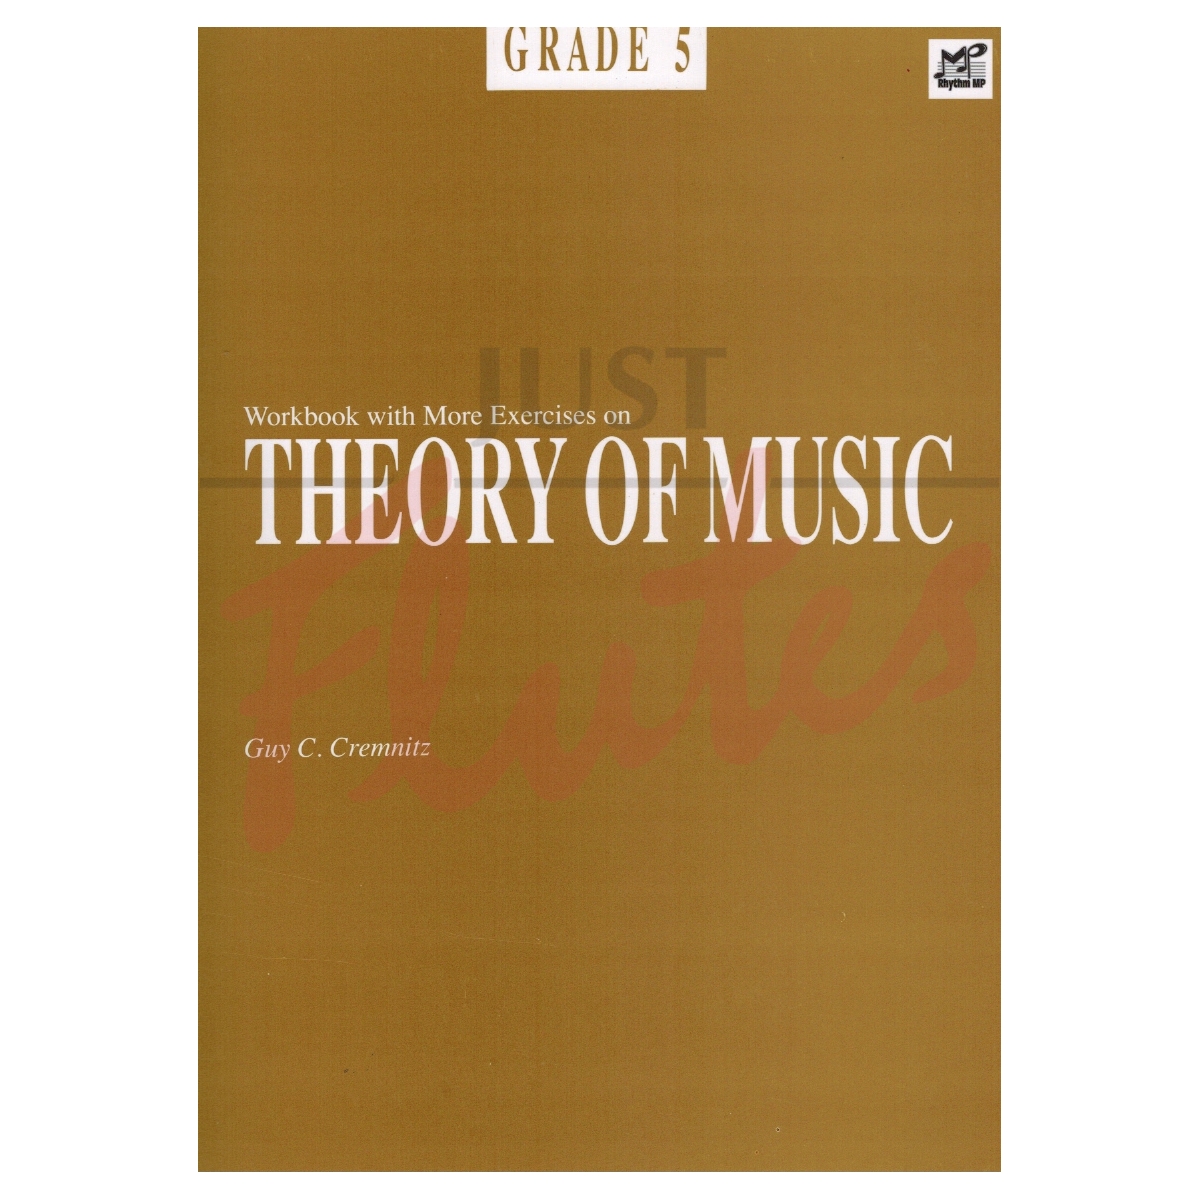 Workbook with More Exercises on Theory of Music Grade 5